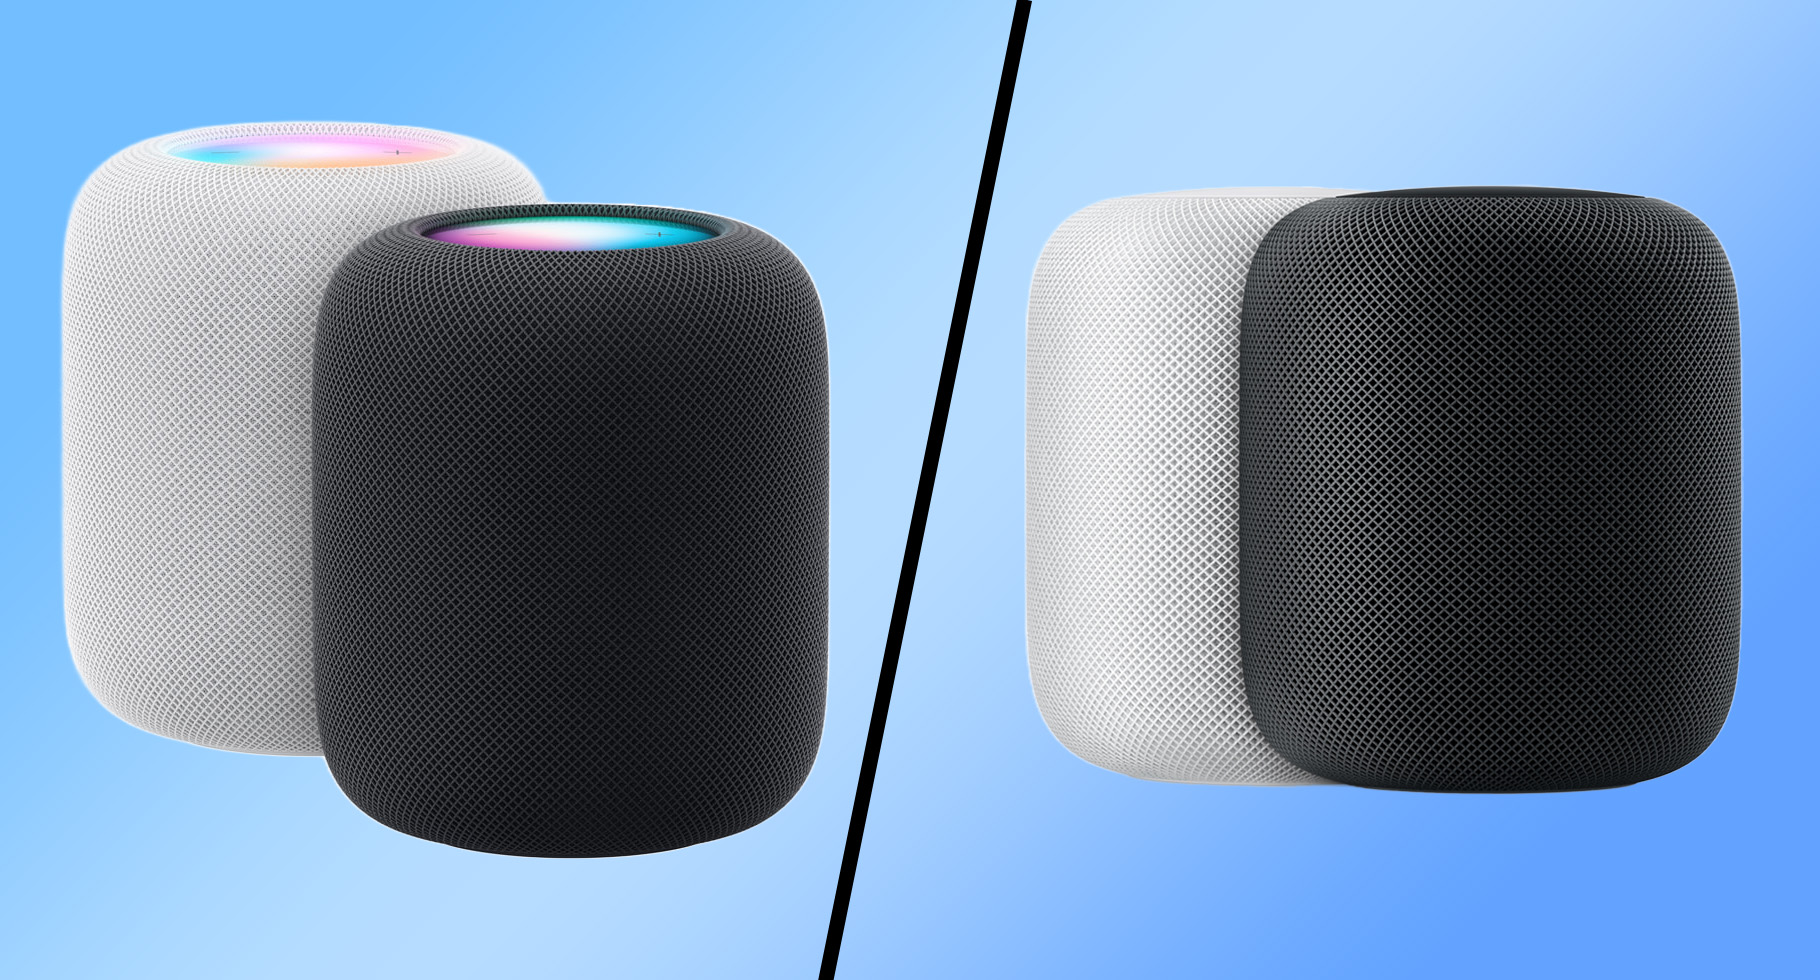 Apple HomePod vs. HomePod 2: What's different?